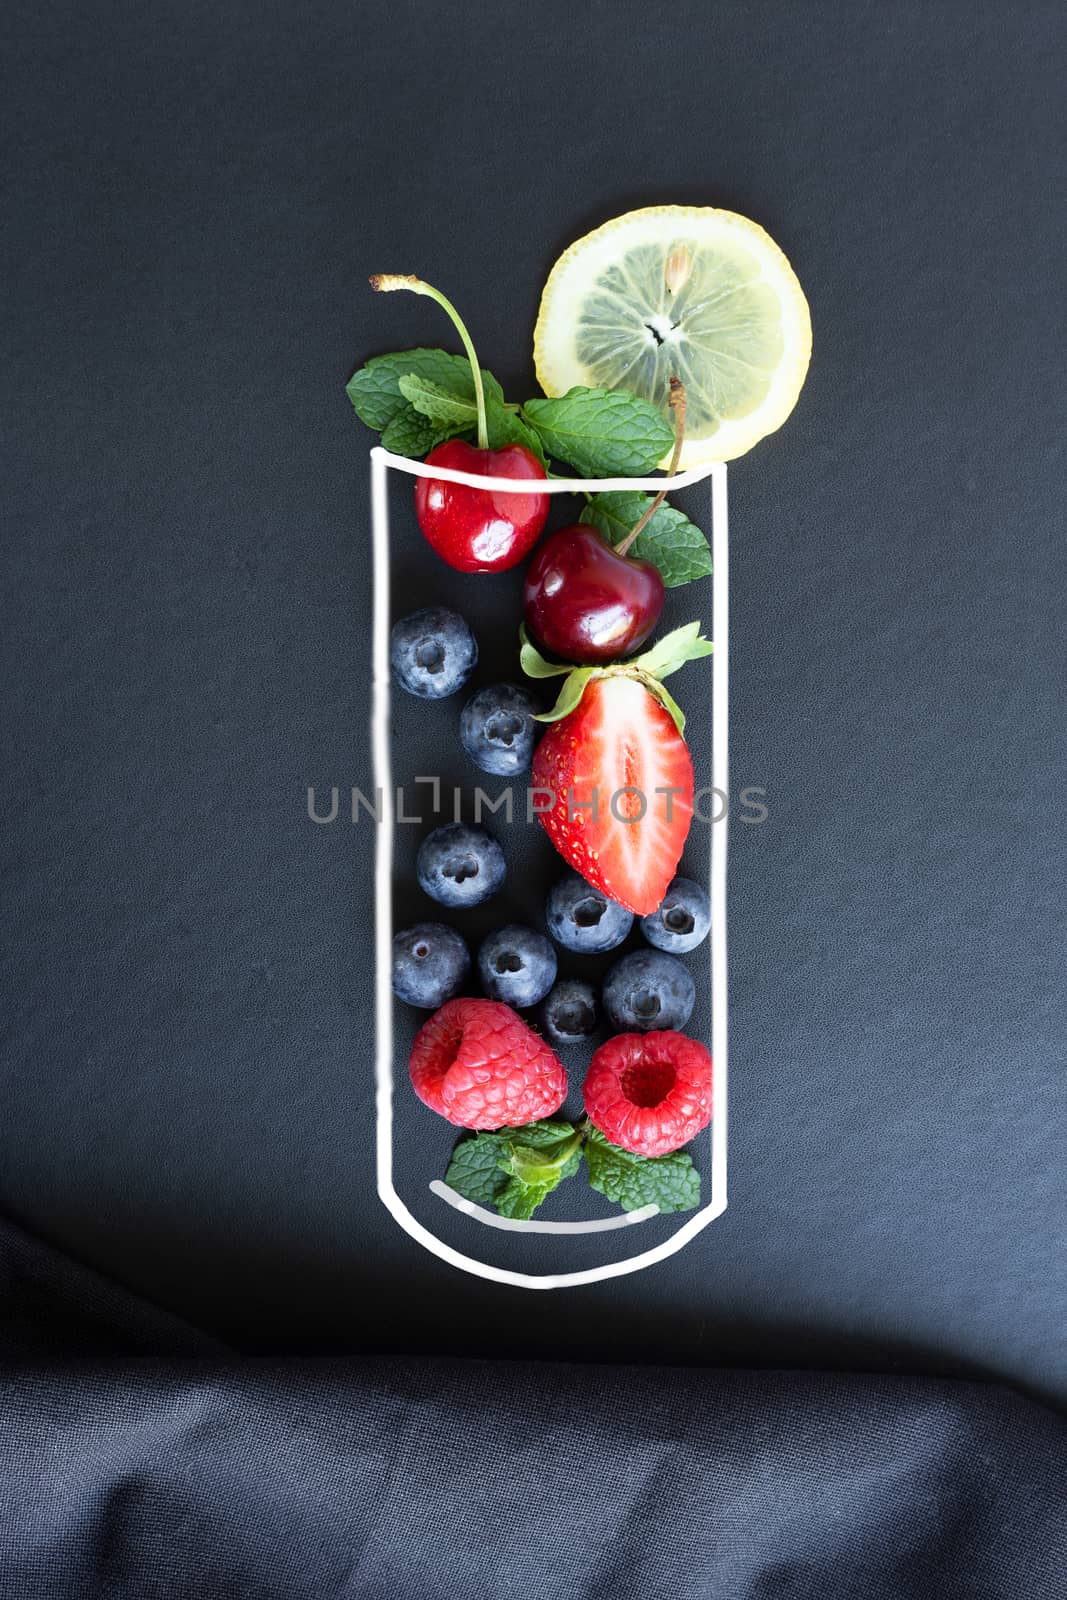 Summer fruits, berries, lemon and mint in chalk painted glass of juice on black background with canvas. Conceptual healthy, vitamin, diettary food. Vegan, vegetarian and detox food and drinks. Menu mock up, poster concept